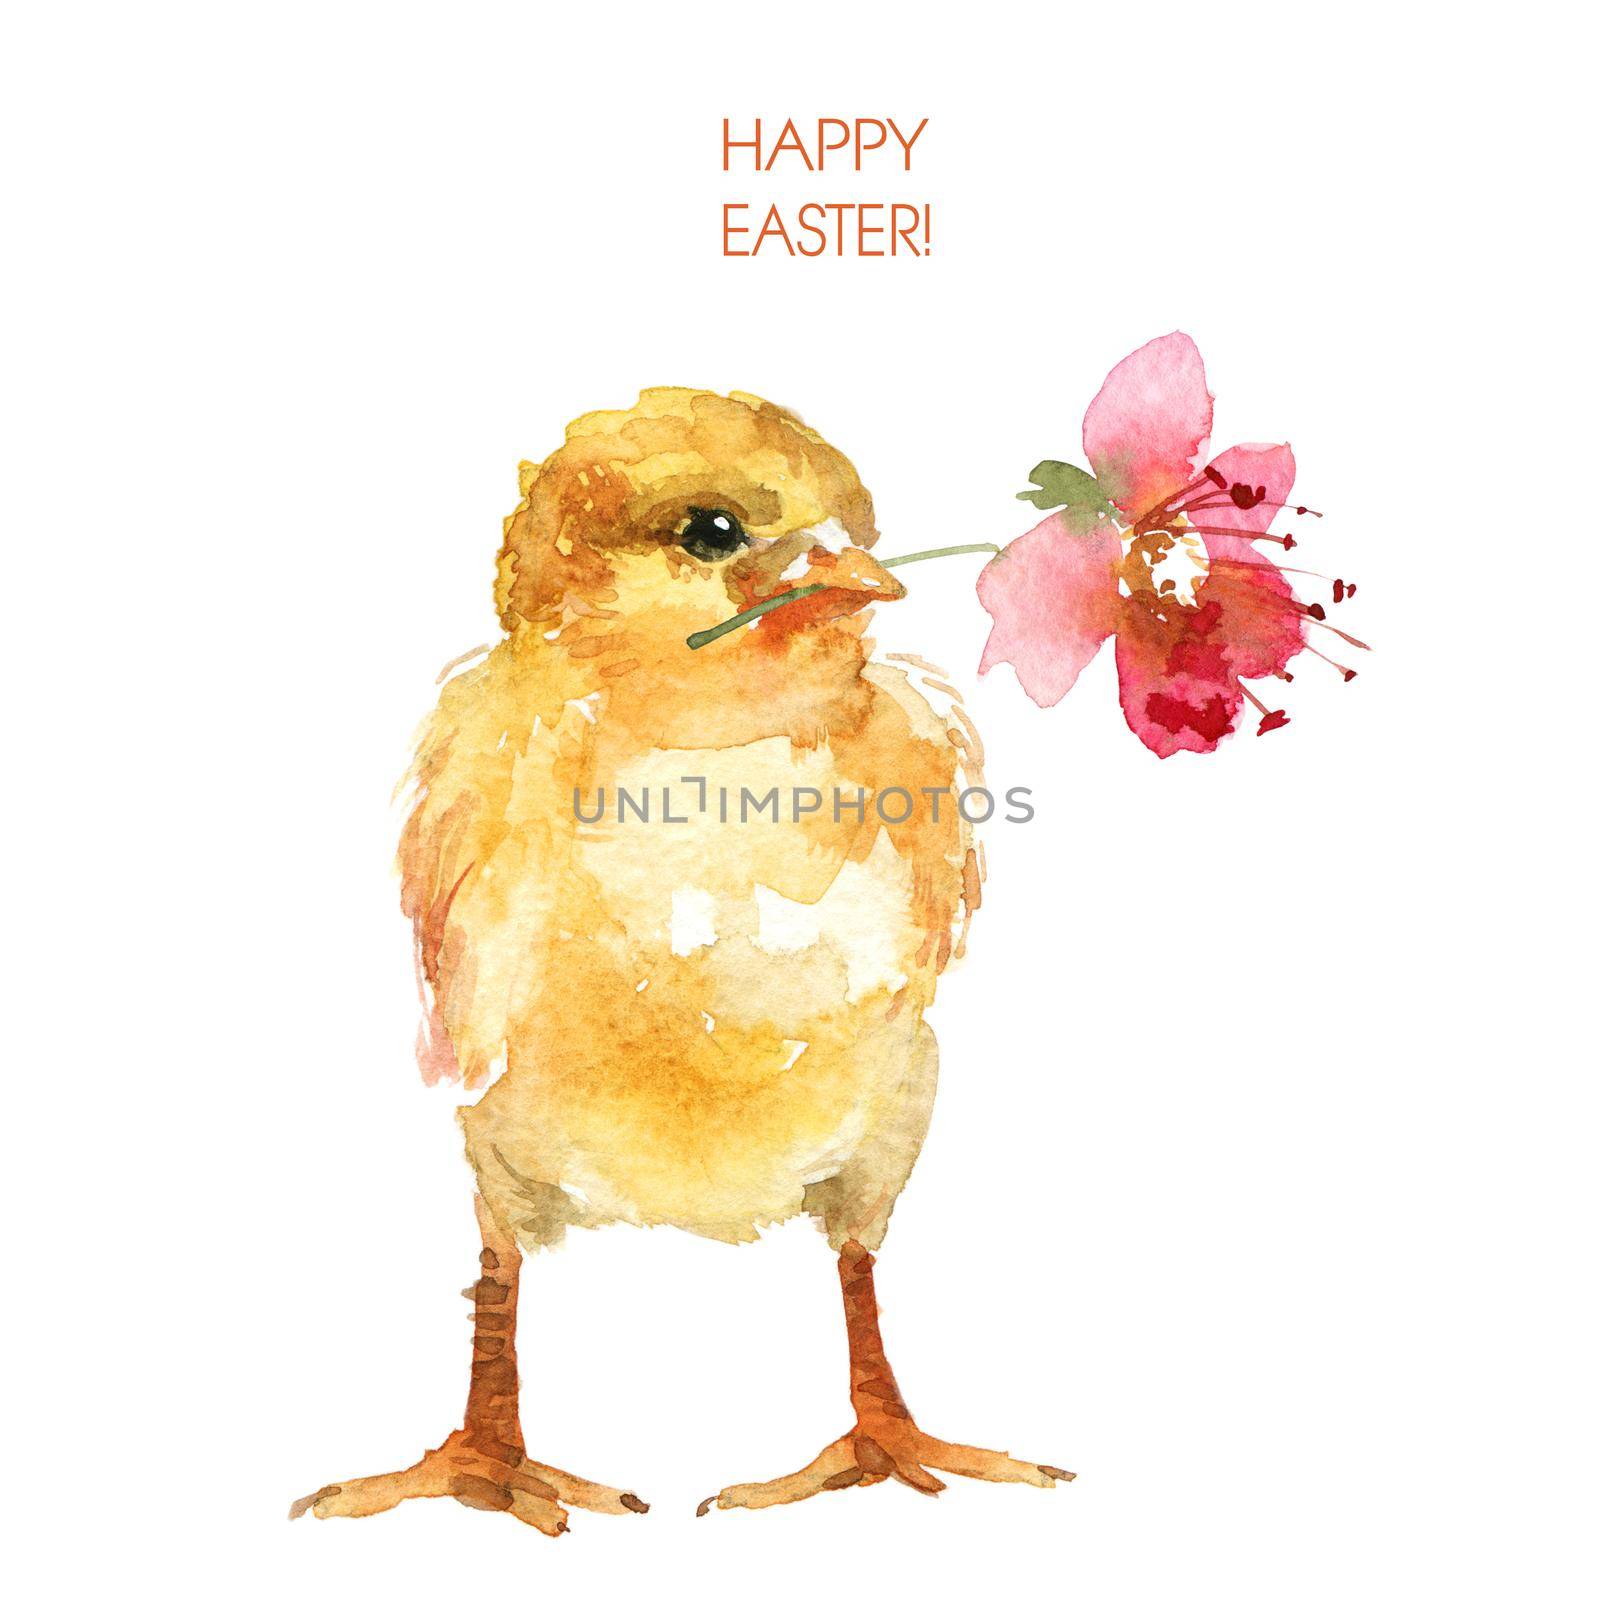 Watercolor illustrations of cute little chick with a flower in its beak. Happy easter greeting card design.